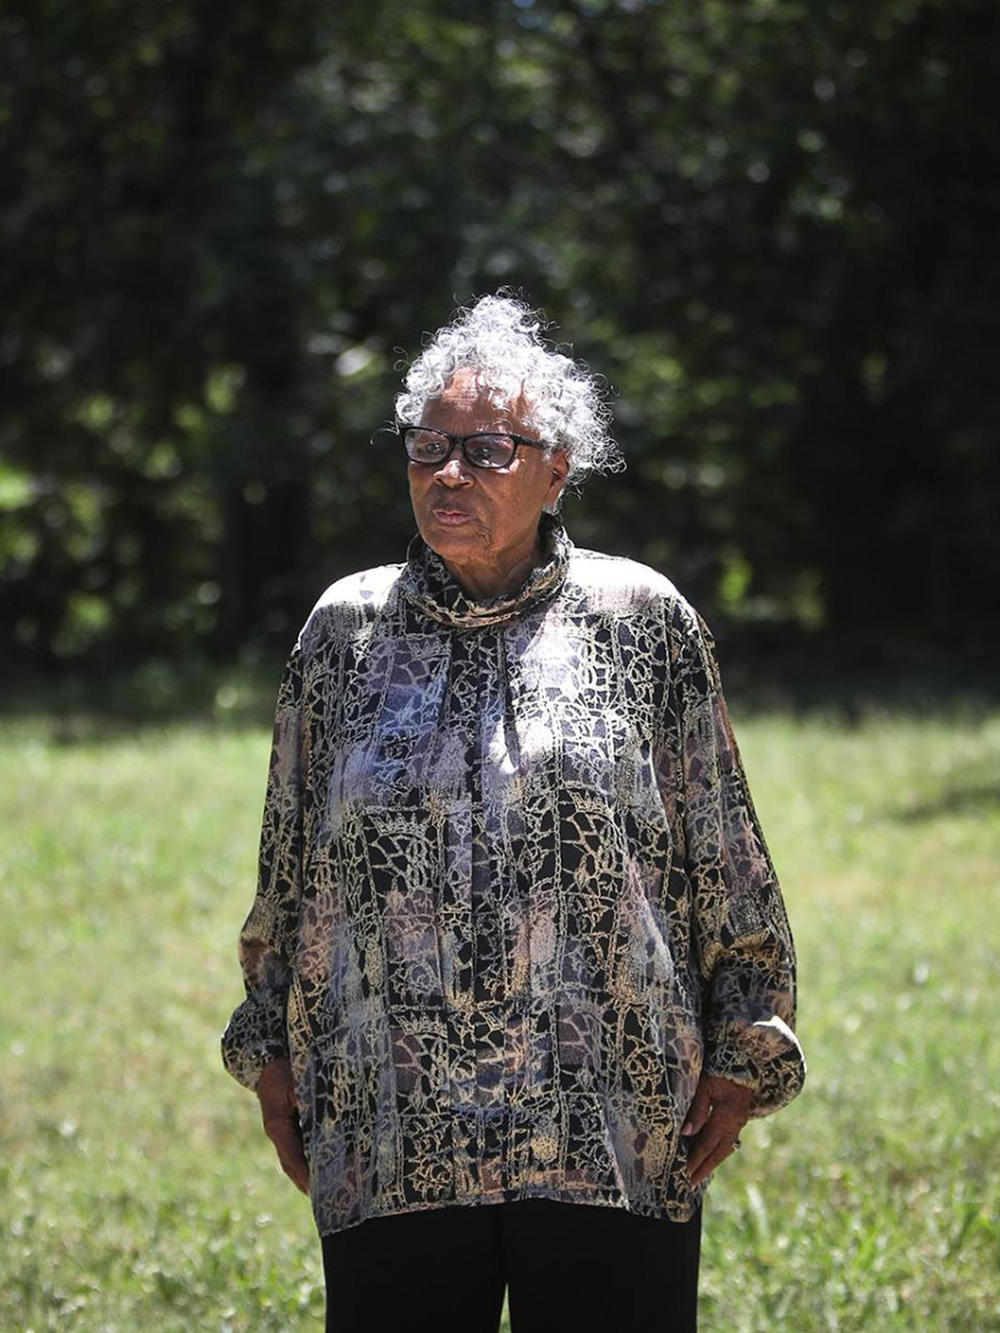 Opal Lee stands in front of the East Annie Street lot on June 2, 2021, where white rioters attacked, invaded and burned her family's home in Fort Worth, Texas in 1939. (Amanda McCoy/Fort Worth Star-Telegram/Tribune News Service via Getty Images)